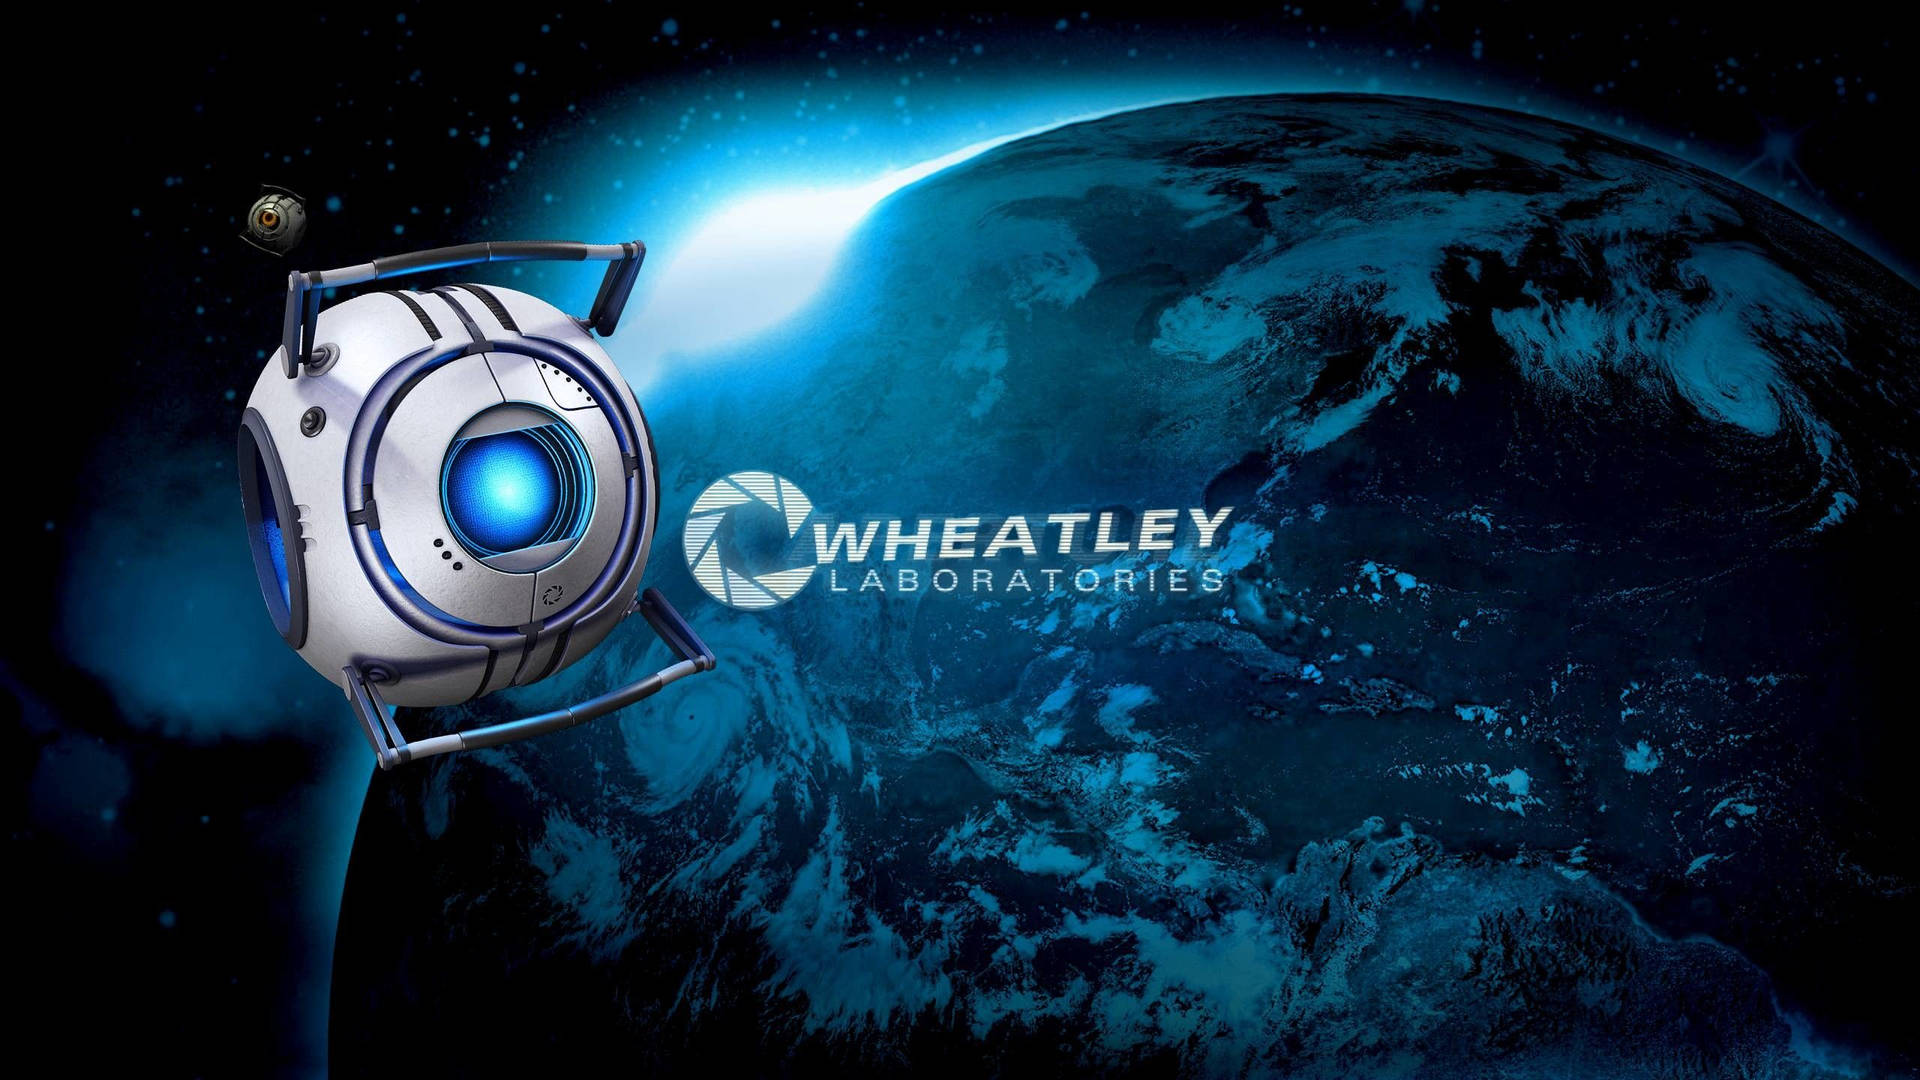 Wheatley - A Spaceship With A Blue Light Wallpaper